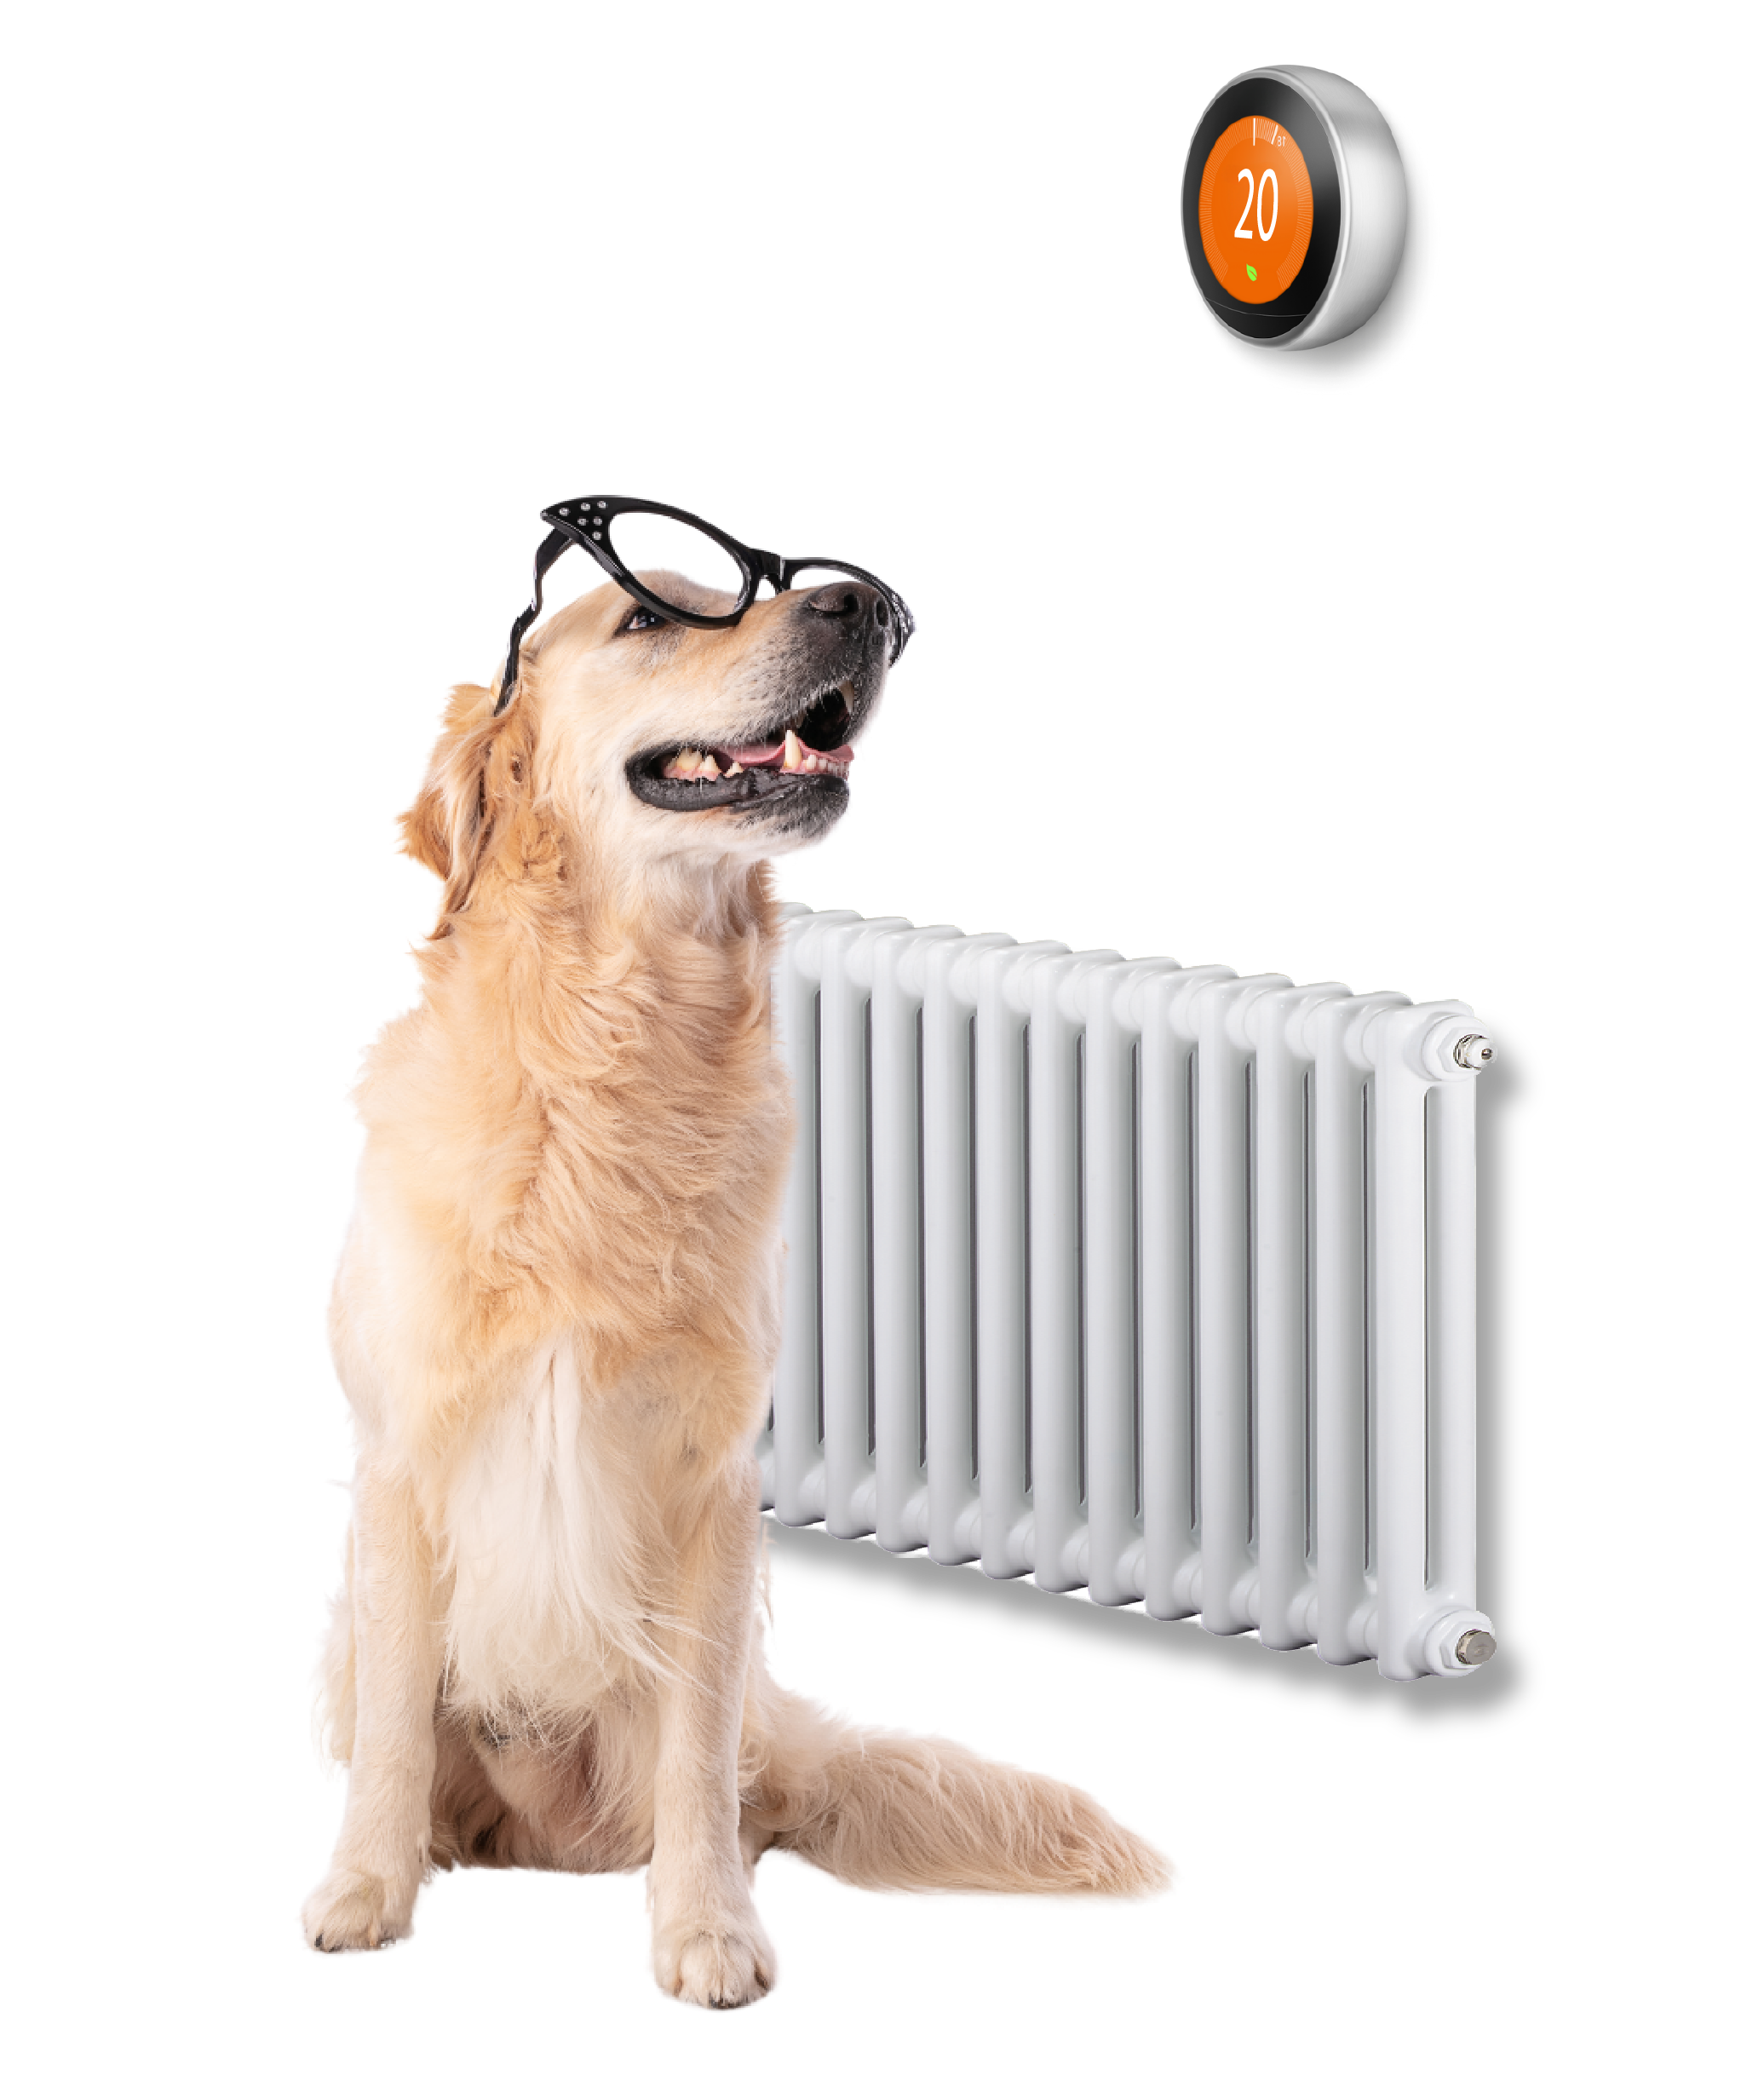 Dog wearing glasses, looking at a thermostat